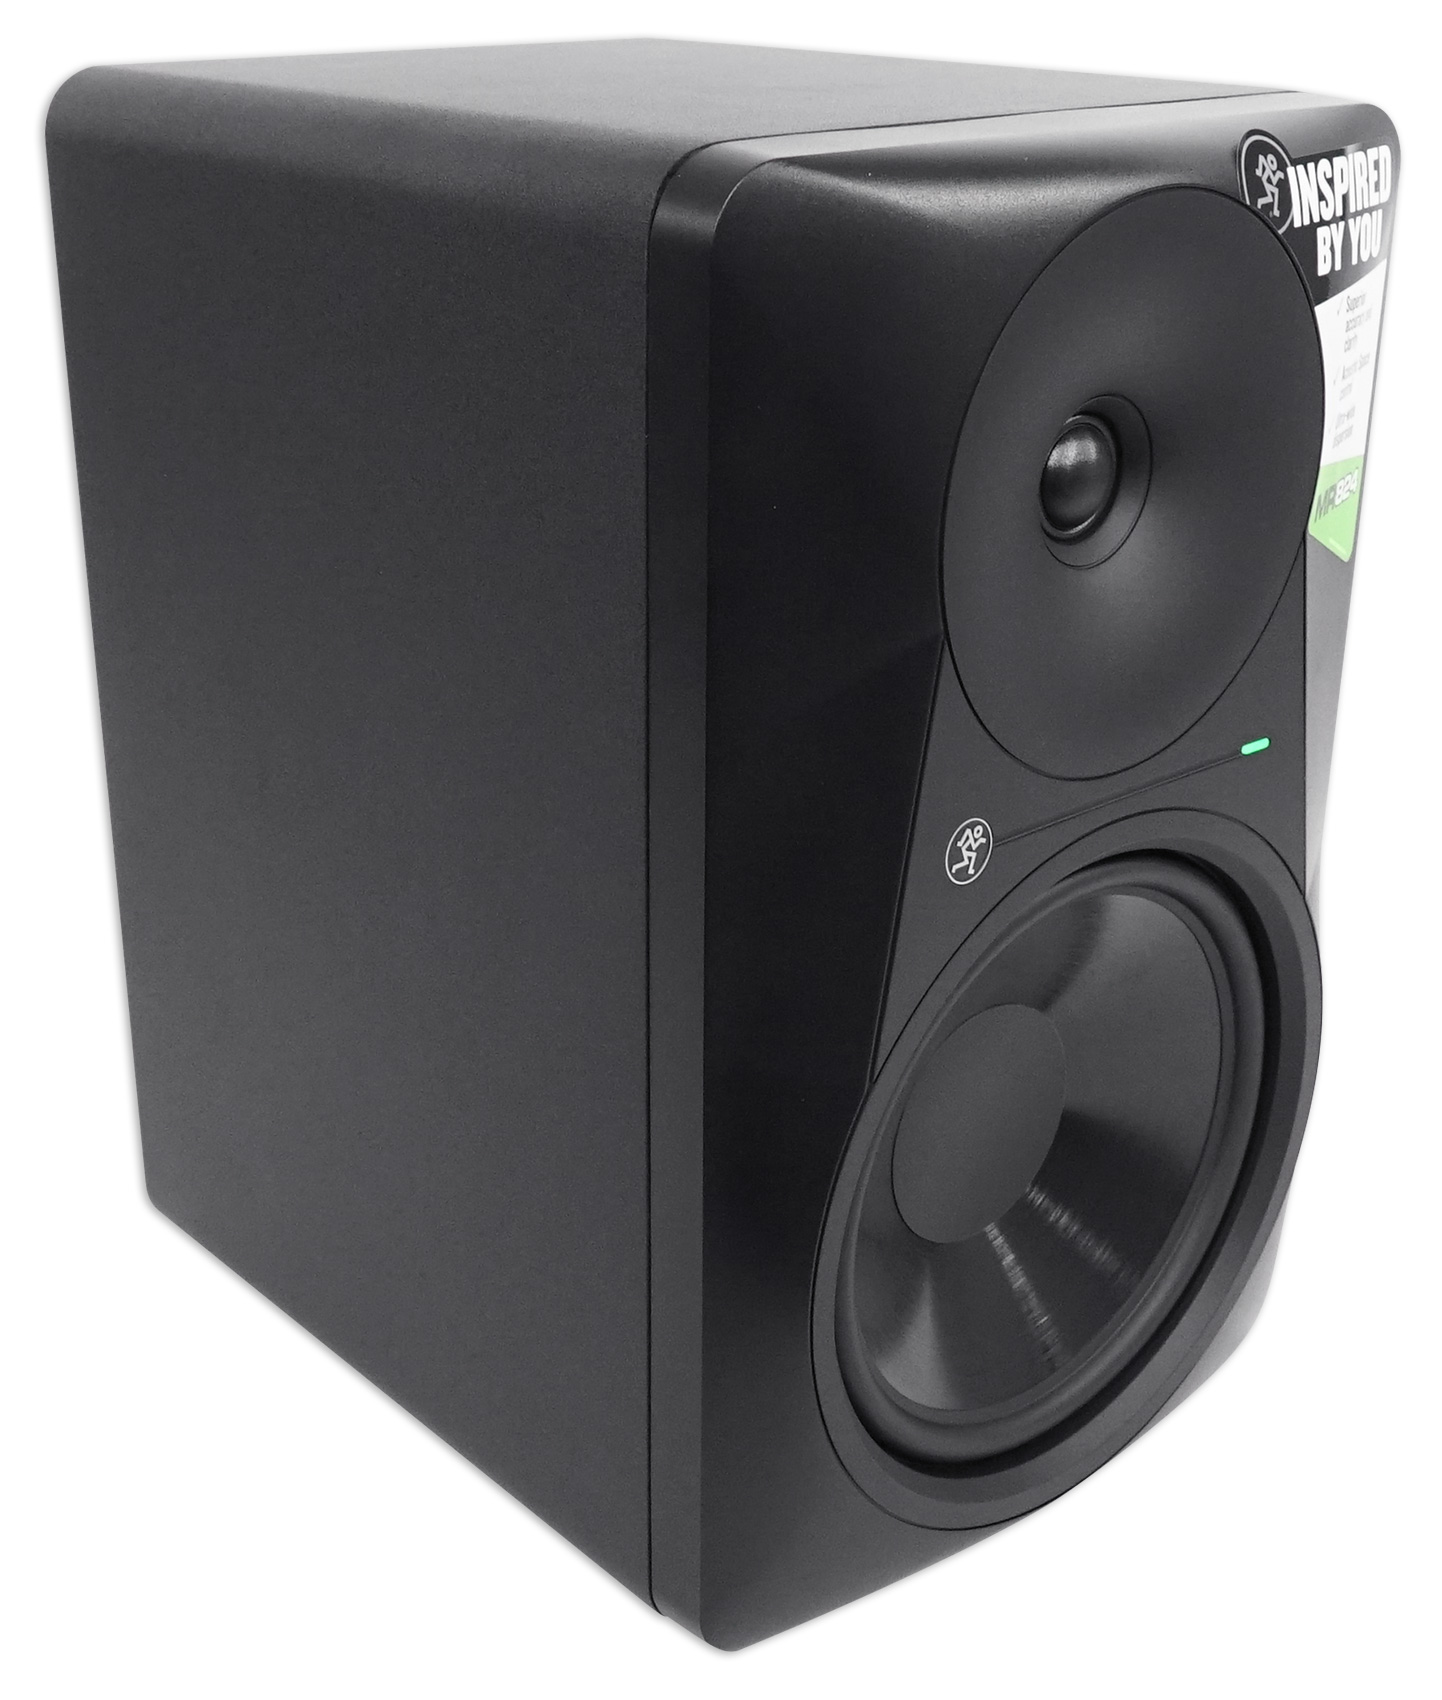 2 Mackie MR824 8” Powered Studio Monitors+10" Active Sub+Mic+Mount+Stands+Pads - image 3 of 10